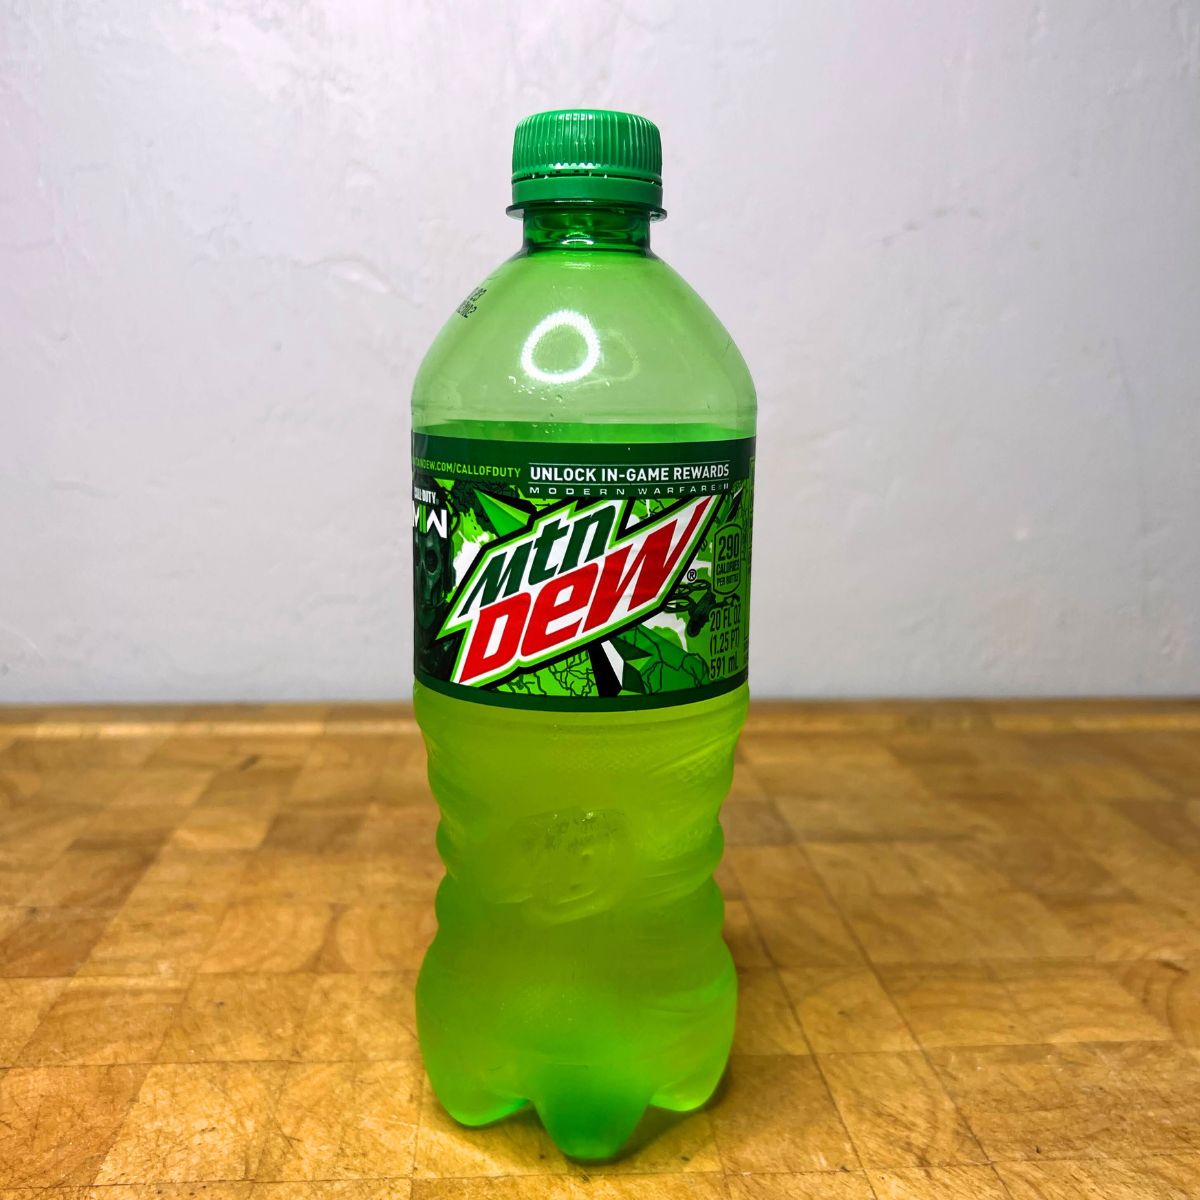 Bottle of Mountain Dew on a table.